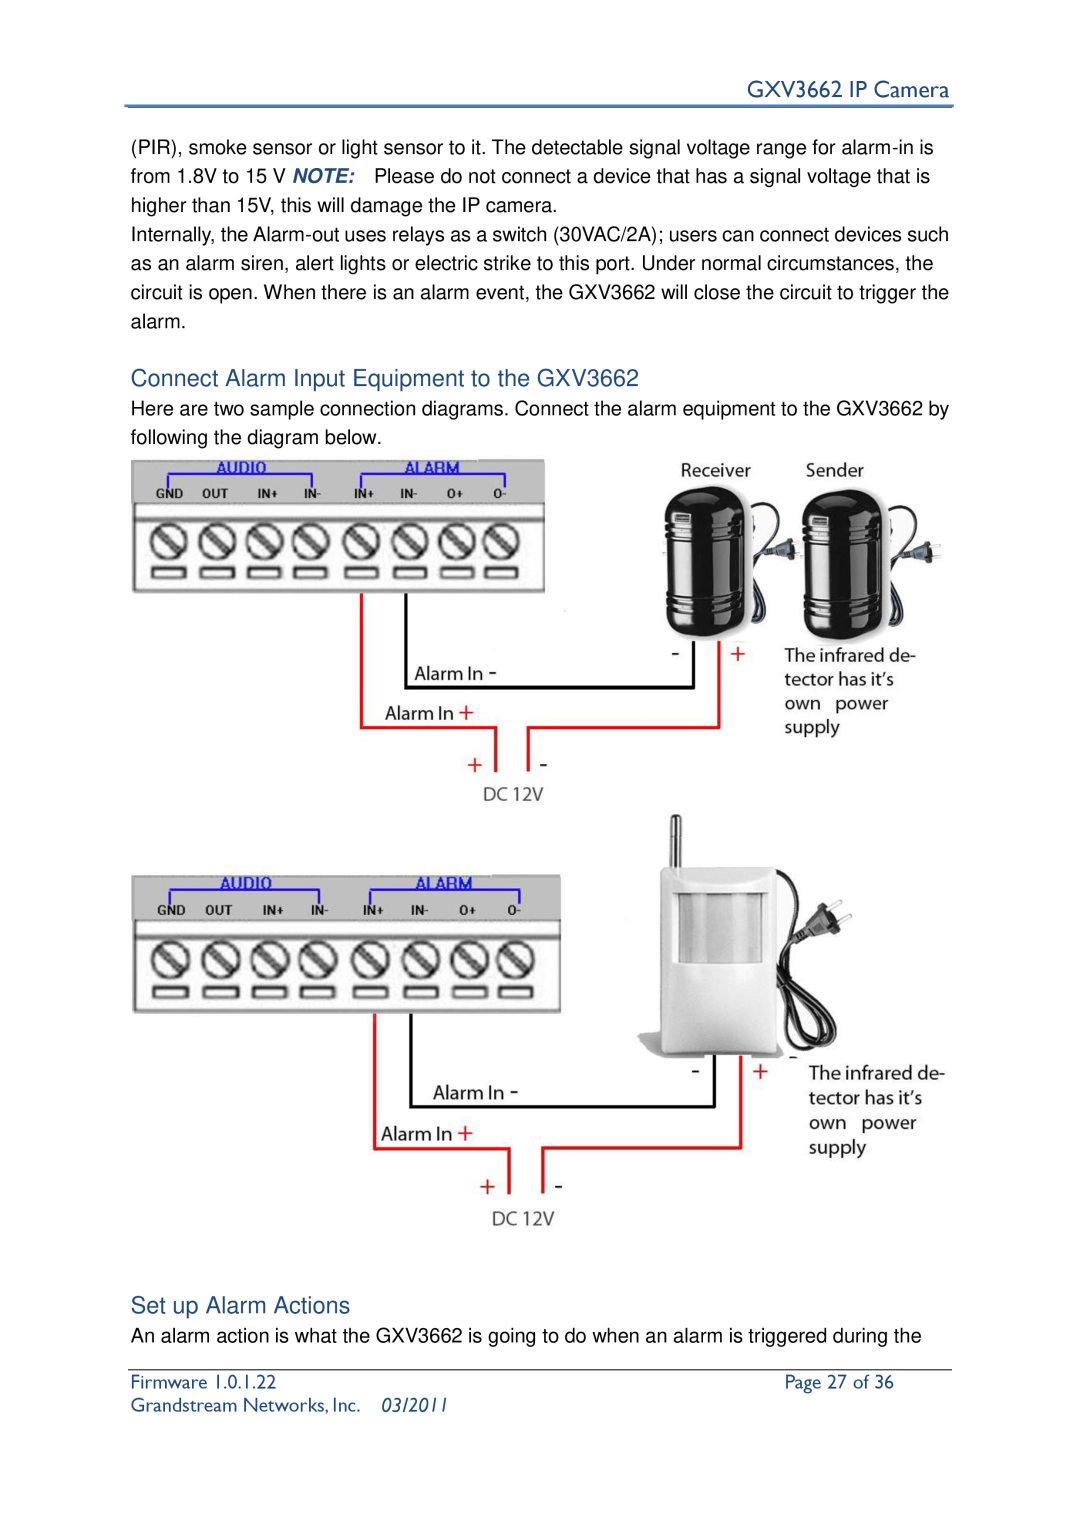 Grandstream Networks Connect Alarm Input Equipment to the GXV3662, Set up Alarm Actions, Page 27 of, GXV3662 IP Camera 